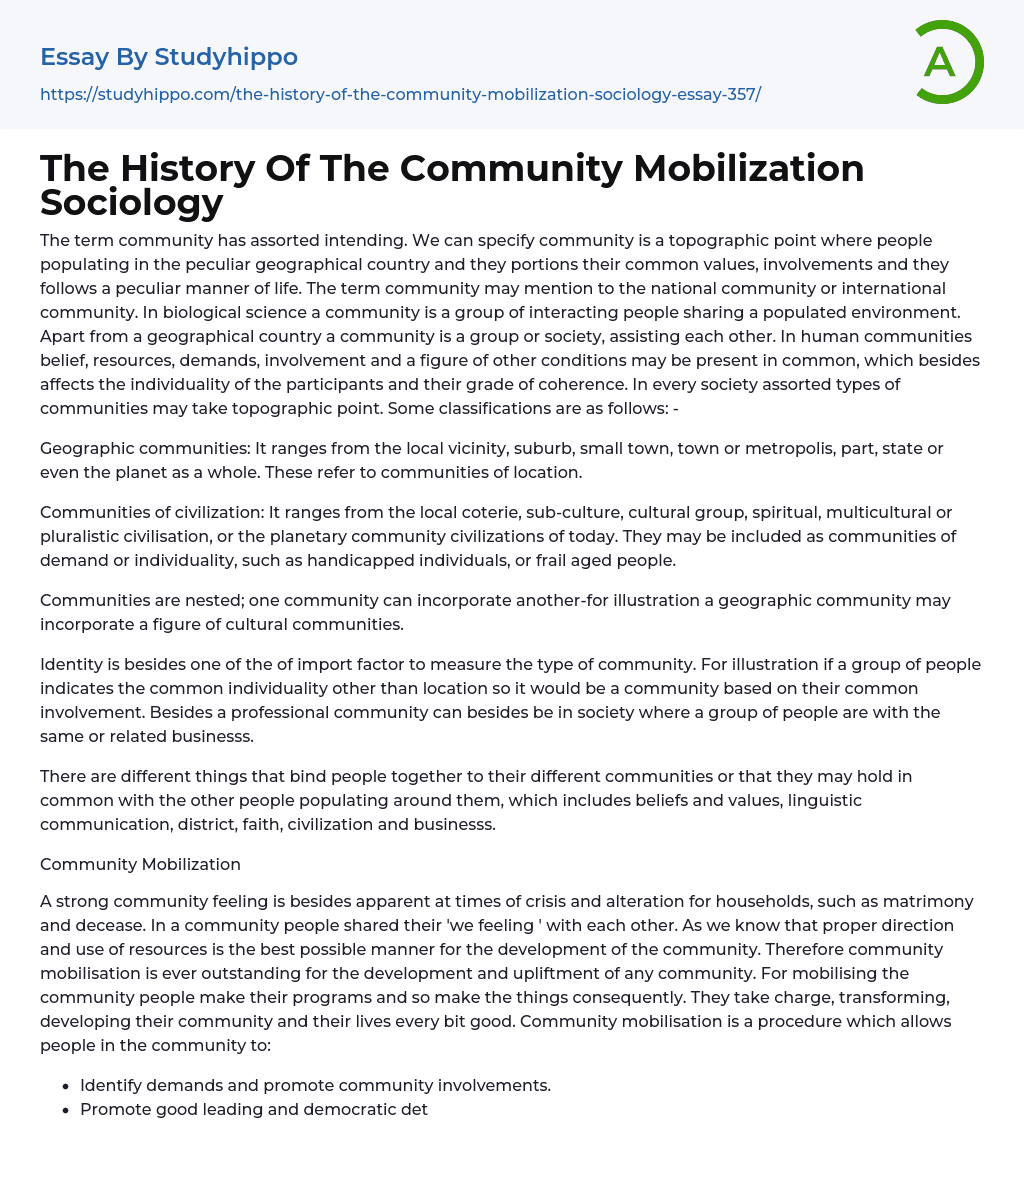 The History Of The Community Mobilization Sociology Essay Example